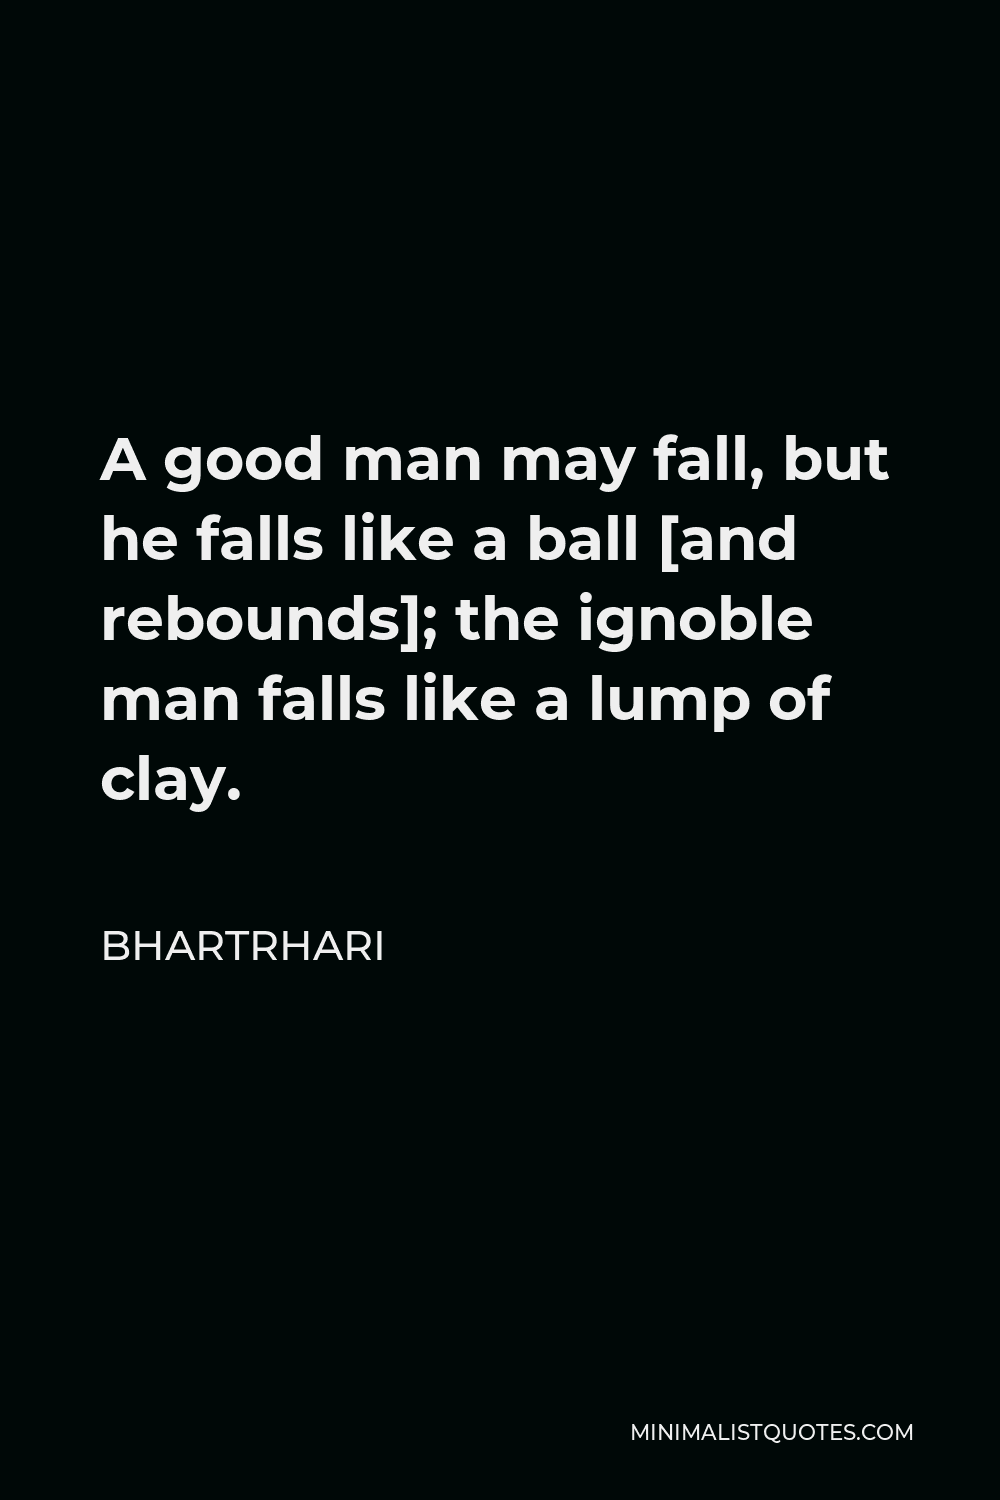 Bhartrhari Quote - A good man may fall, but he falls like a ball [and rebounds]; the ignoble man falls like a lump of clay.